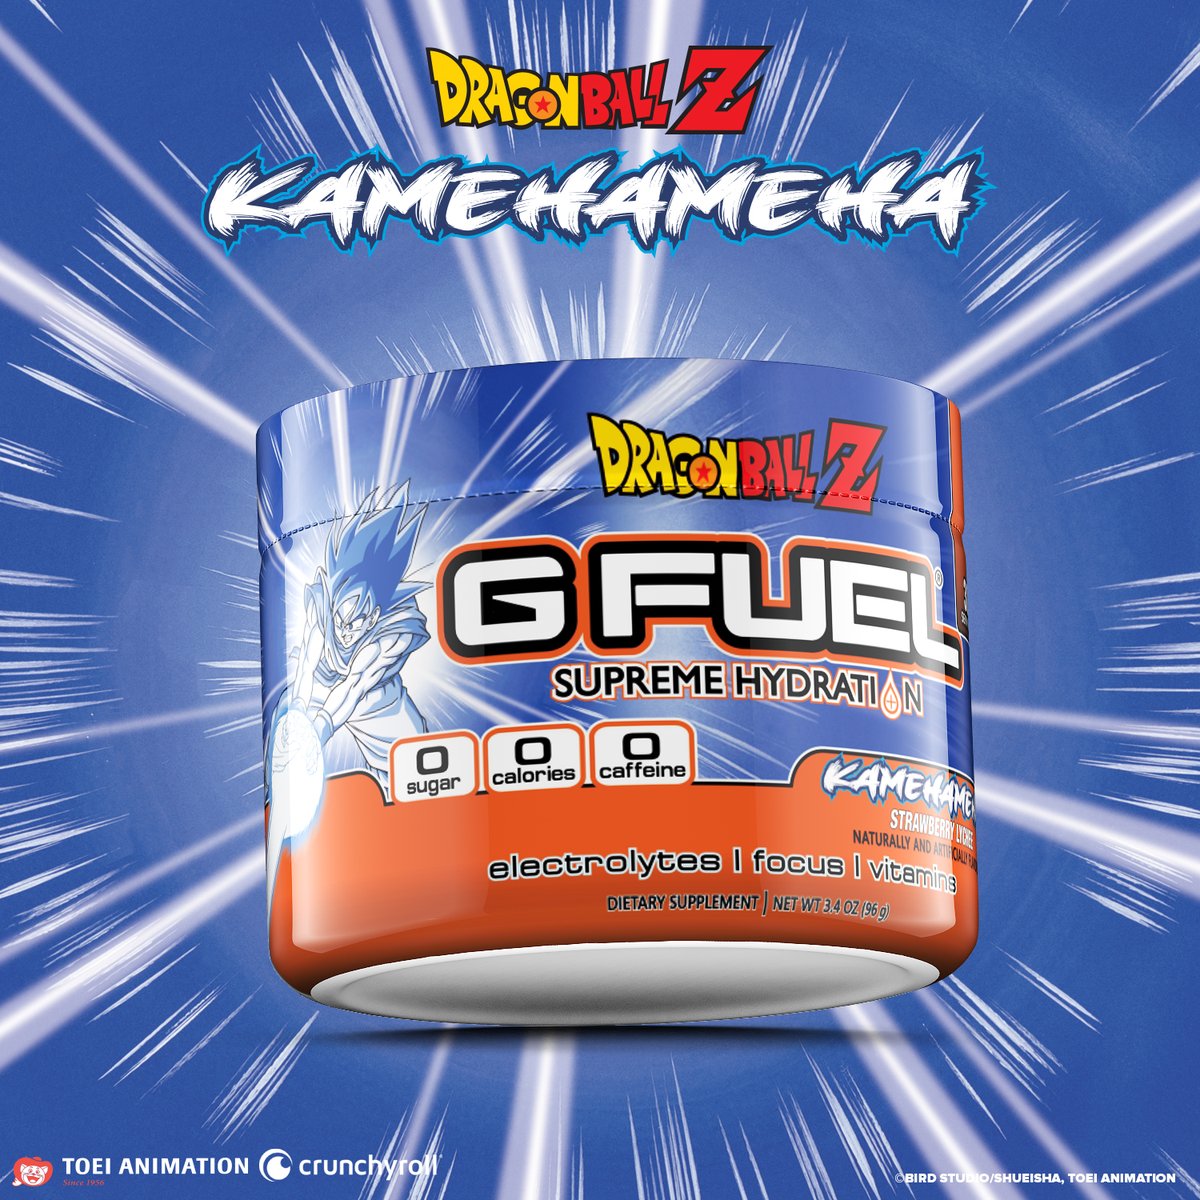 🧡💬 𝗥𝗧 + 𝗖𝗢𝗠𝗠𝗘𝗡𝗧 'GOKU' to win a Strawberry Lychee #DBZ x #GFUEL '𝗞𝗔𝗠𝗘𝗛𝗔𝗠𝗘𝗛𝗔' Tub of your choice! 🐉 2 winners picked tomorrow in honor of #GokuDay! 🛒 𝗚𝗘𝗧 𝗬𝗢𝗨𝗥𝗦: GFUEL.com/collections/dr…